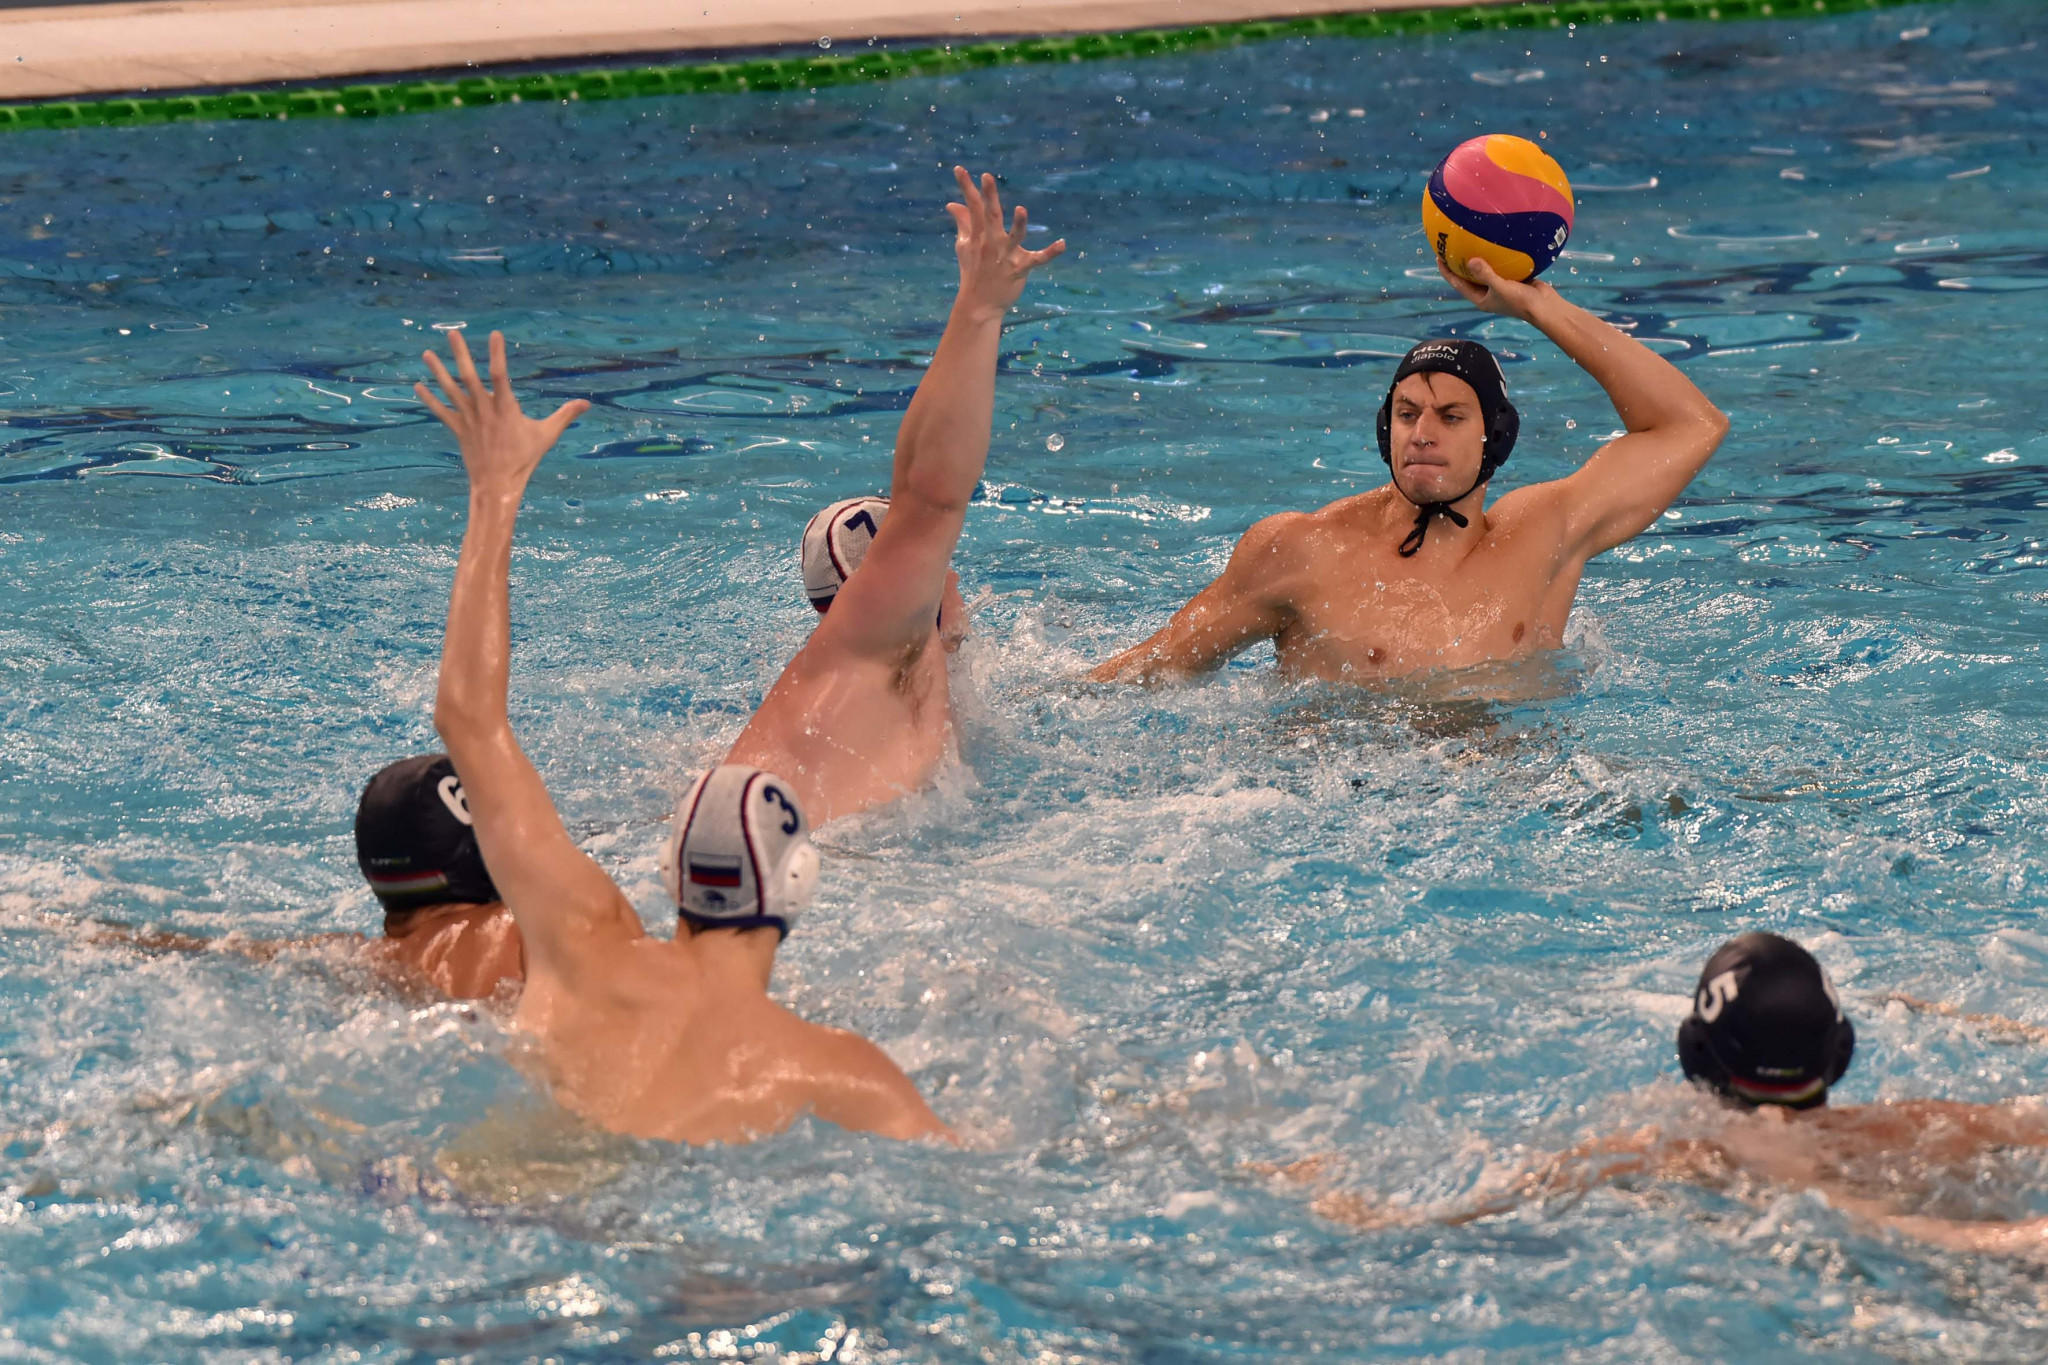 Italy thrashed the US in the men's water polo final at the Naples 2019 Summer Universiade ©Naples 2019